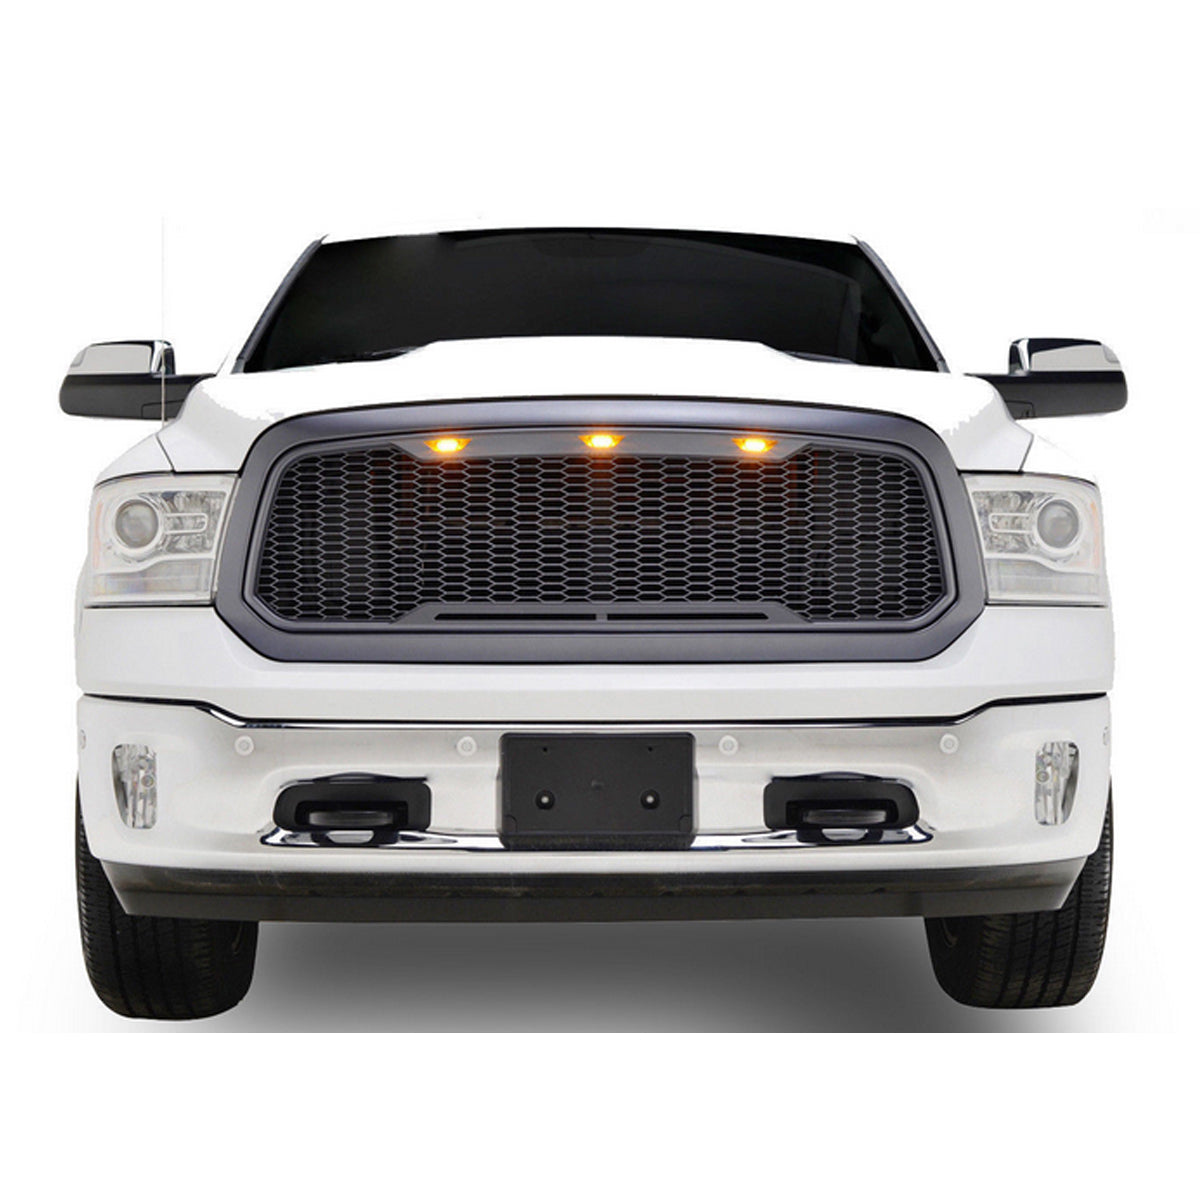 Front Grille ABS Honeycomb Bumper Grill With LED For Dodge Ram 1500 2013-2018 - Auto GoShop